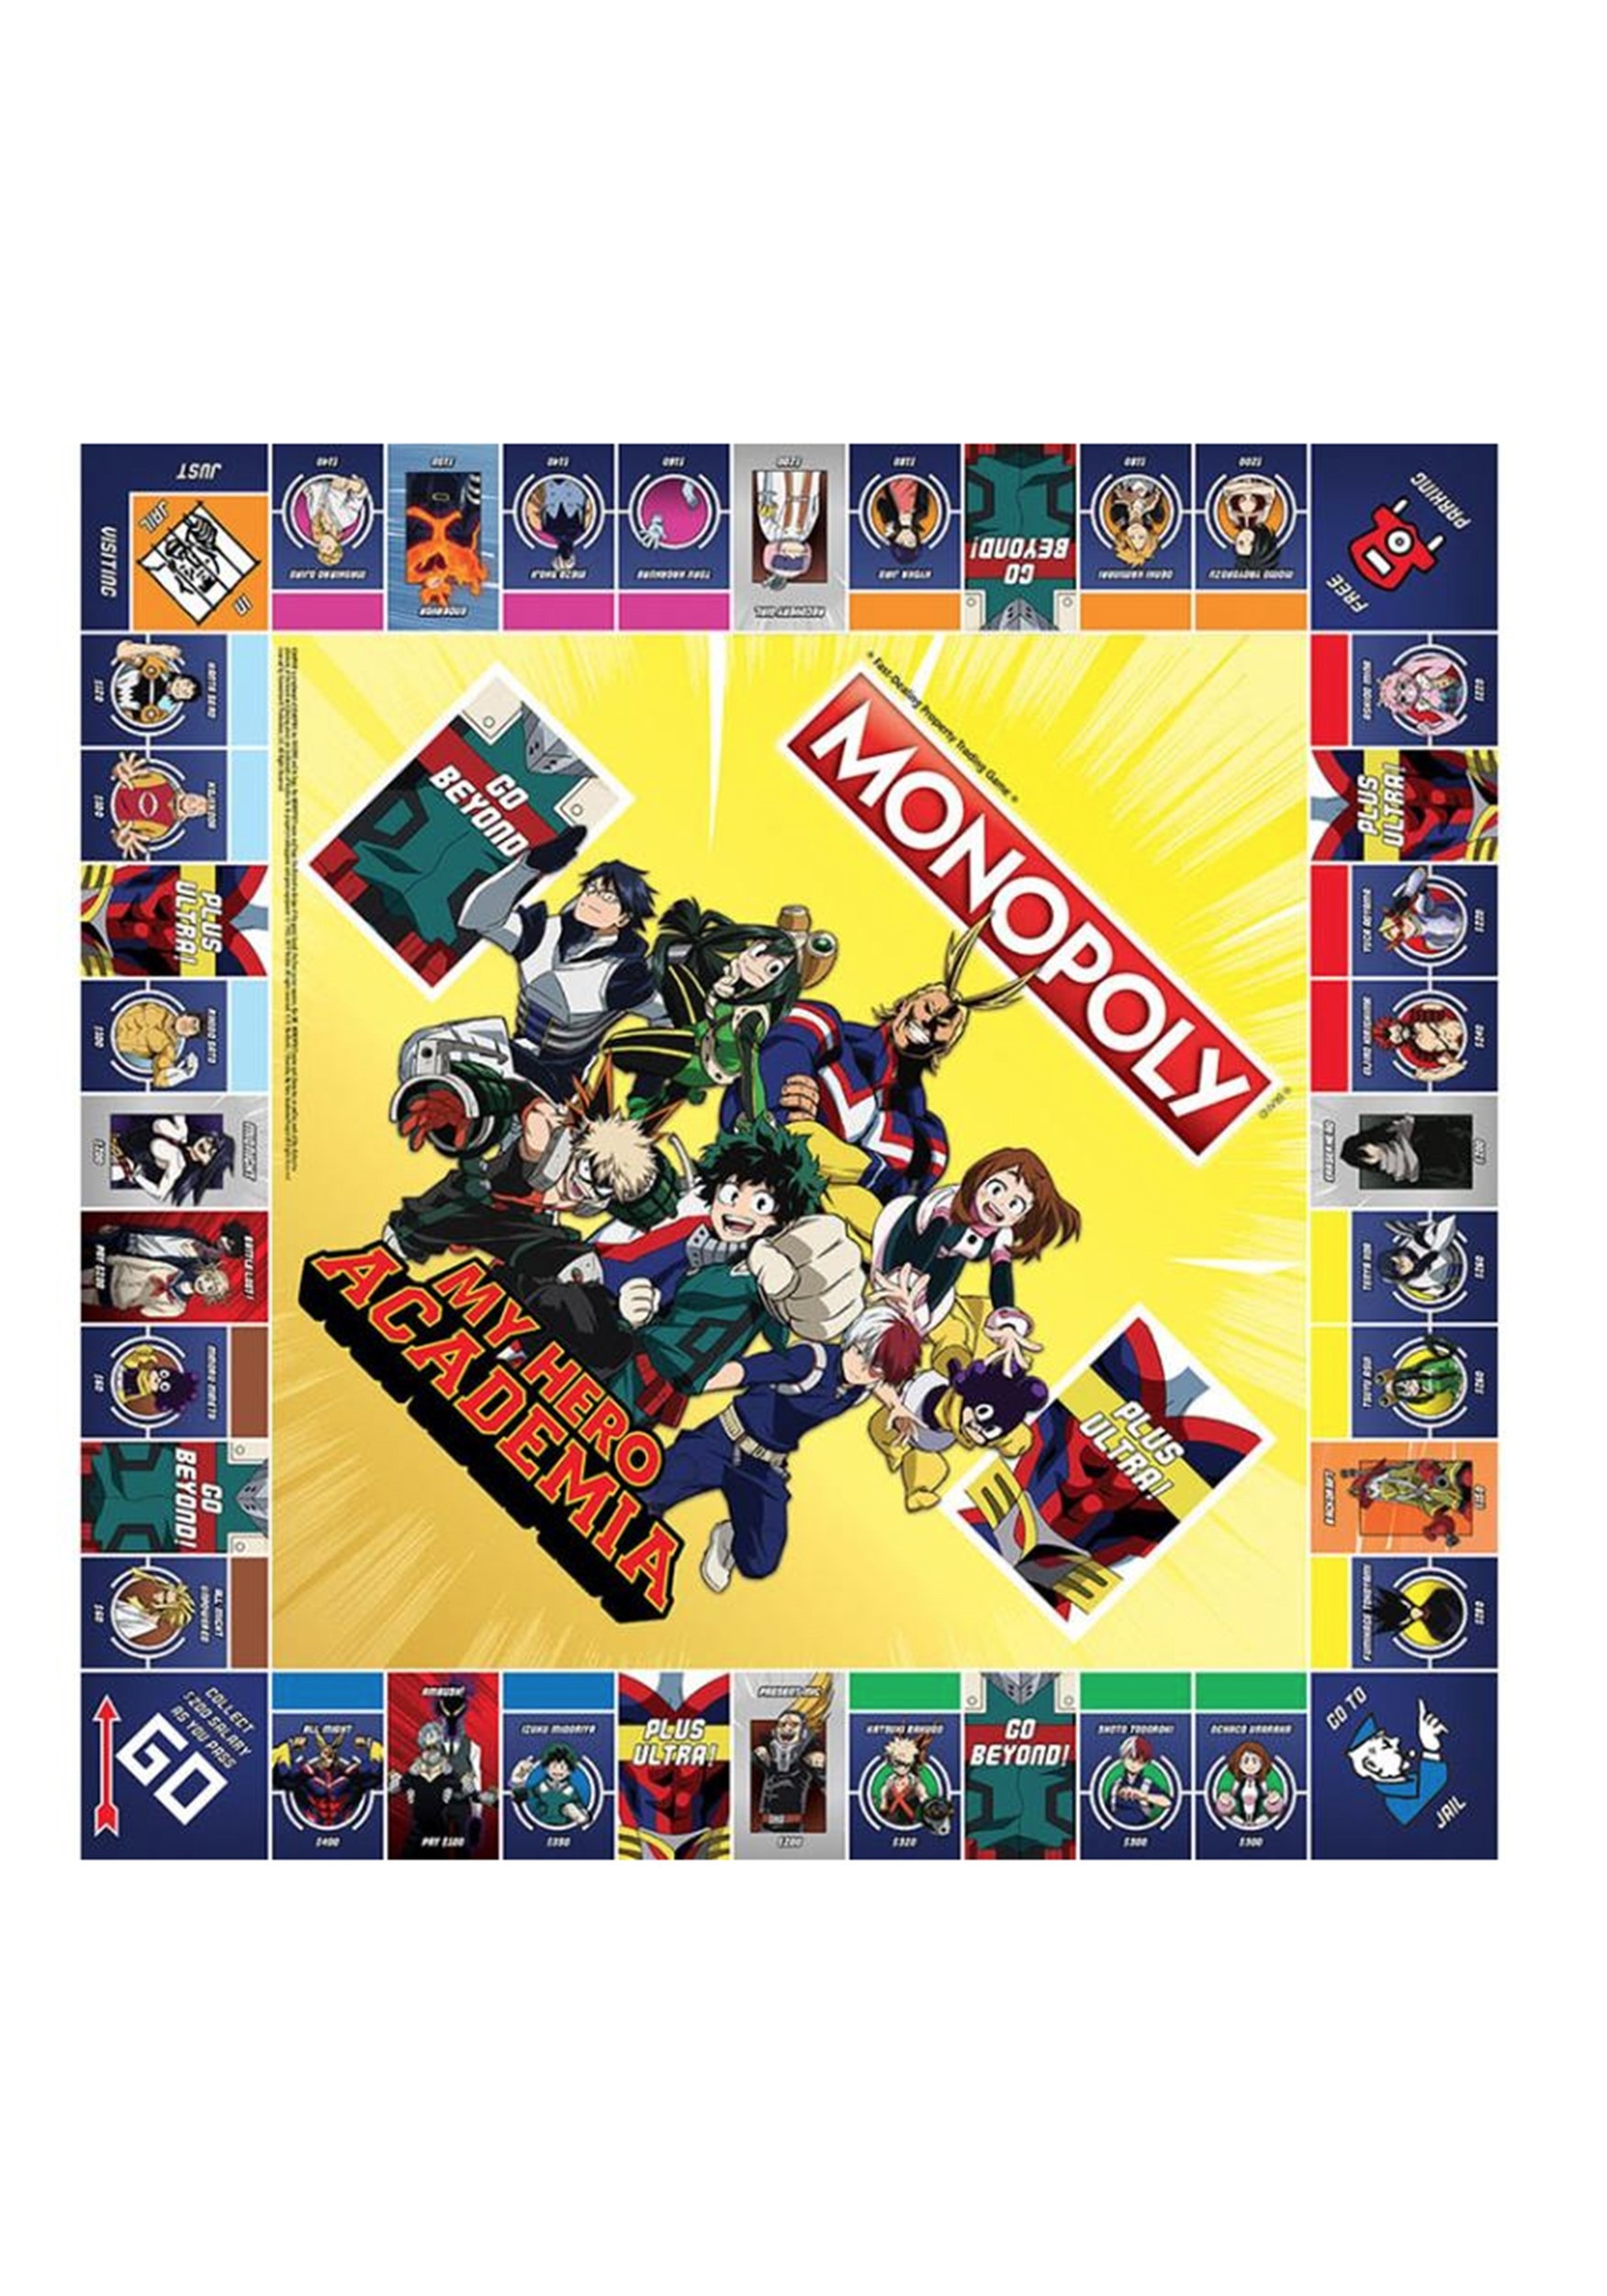 Toys 'R' Us Asia Launches Special-Edition 'Dragon Ball Z' and 'One Piece'  Monopoly Sets - The Toy Book